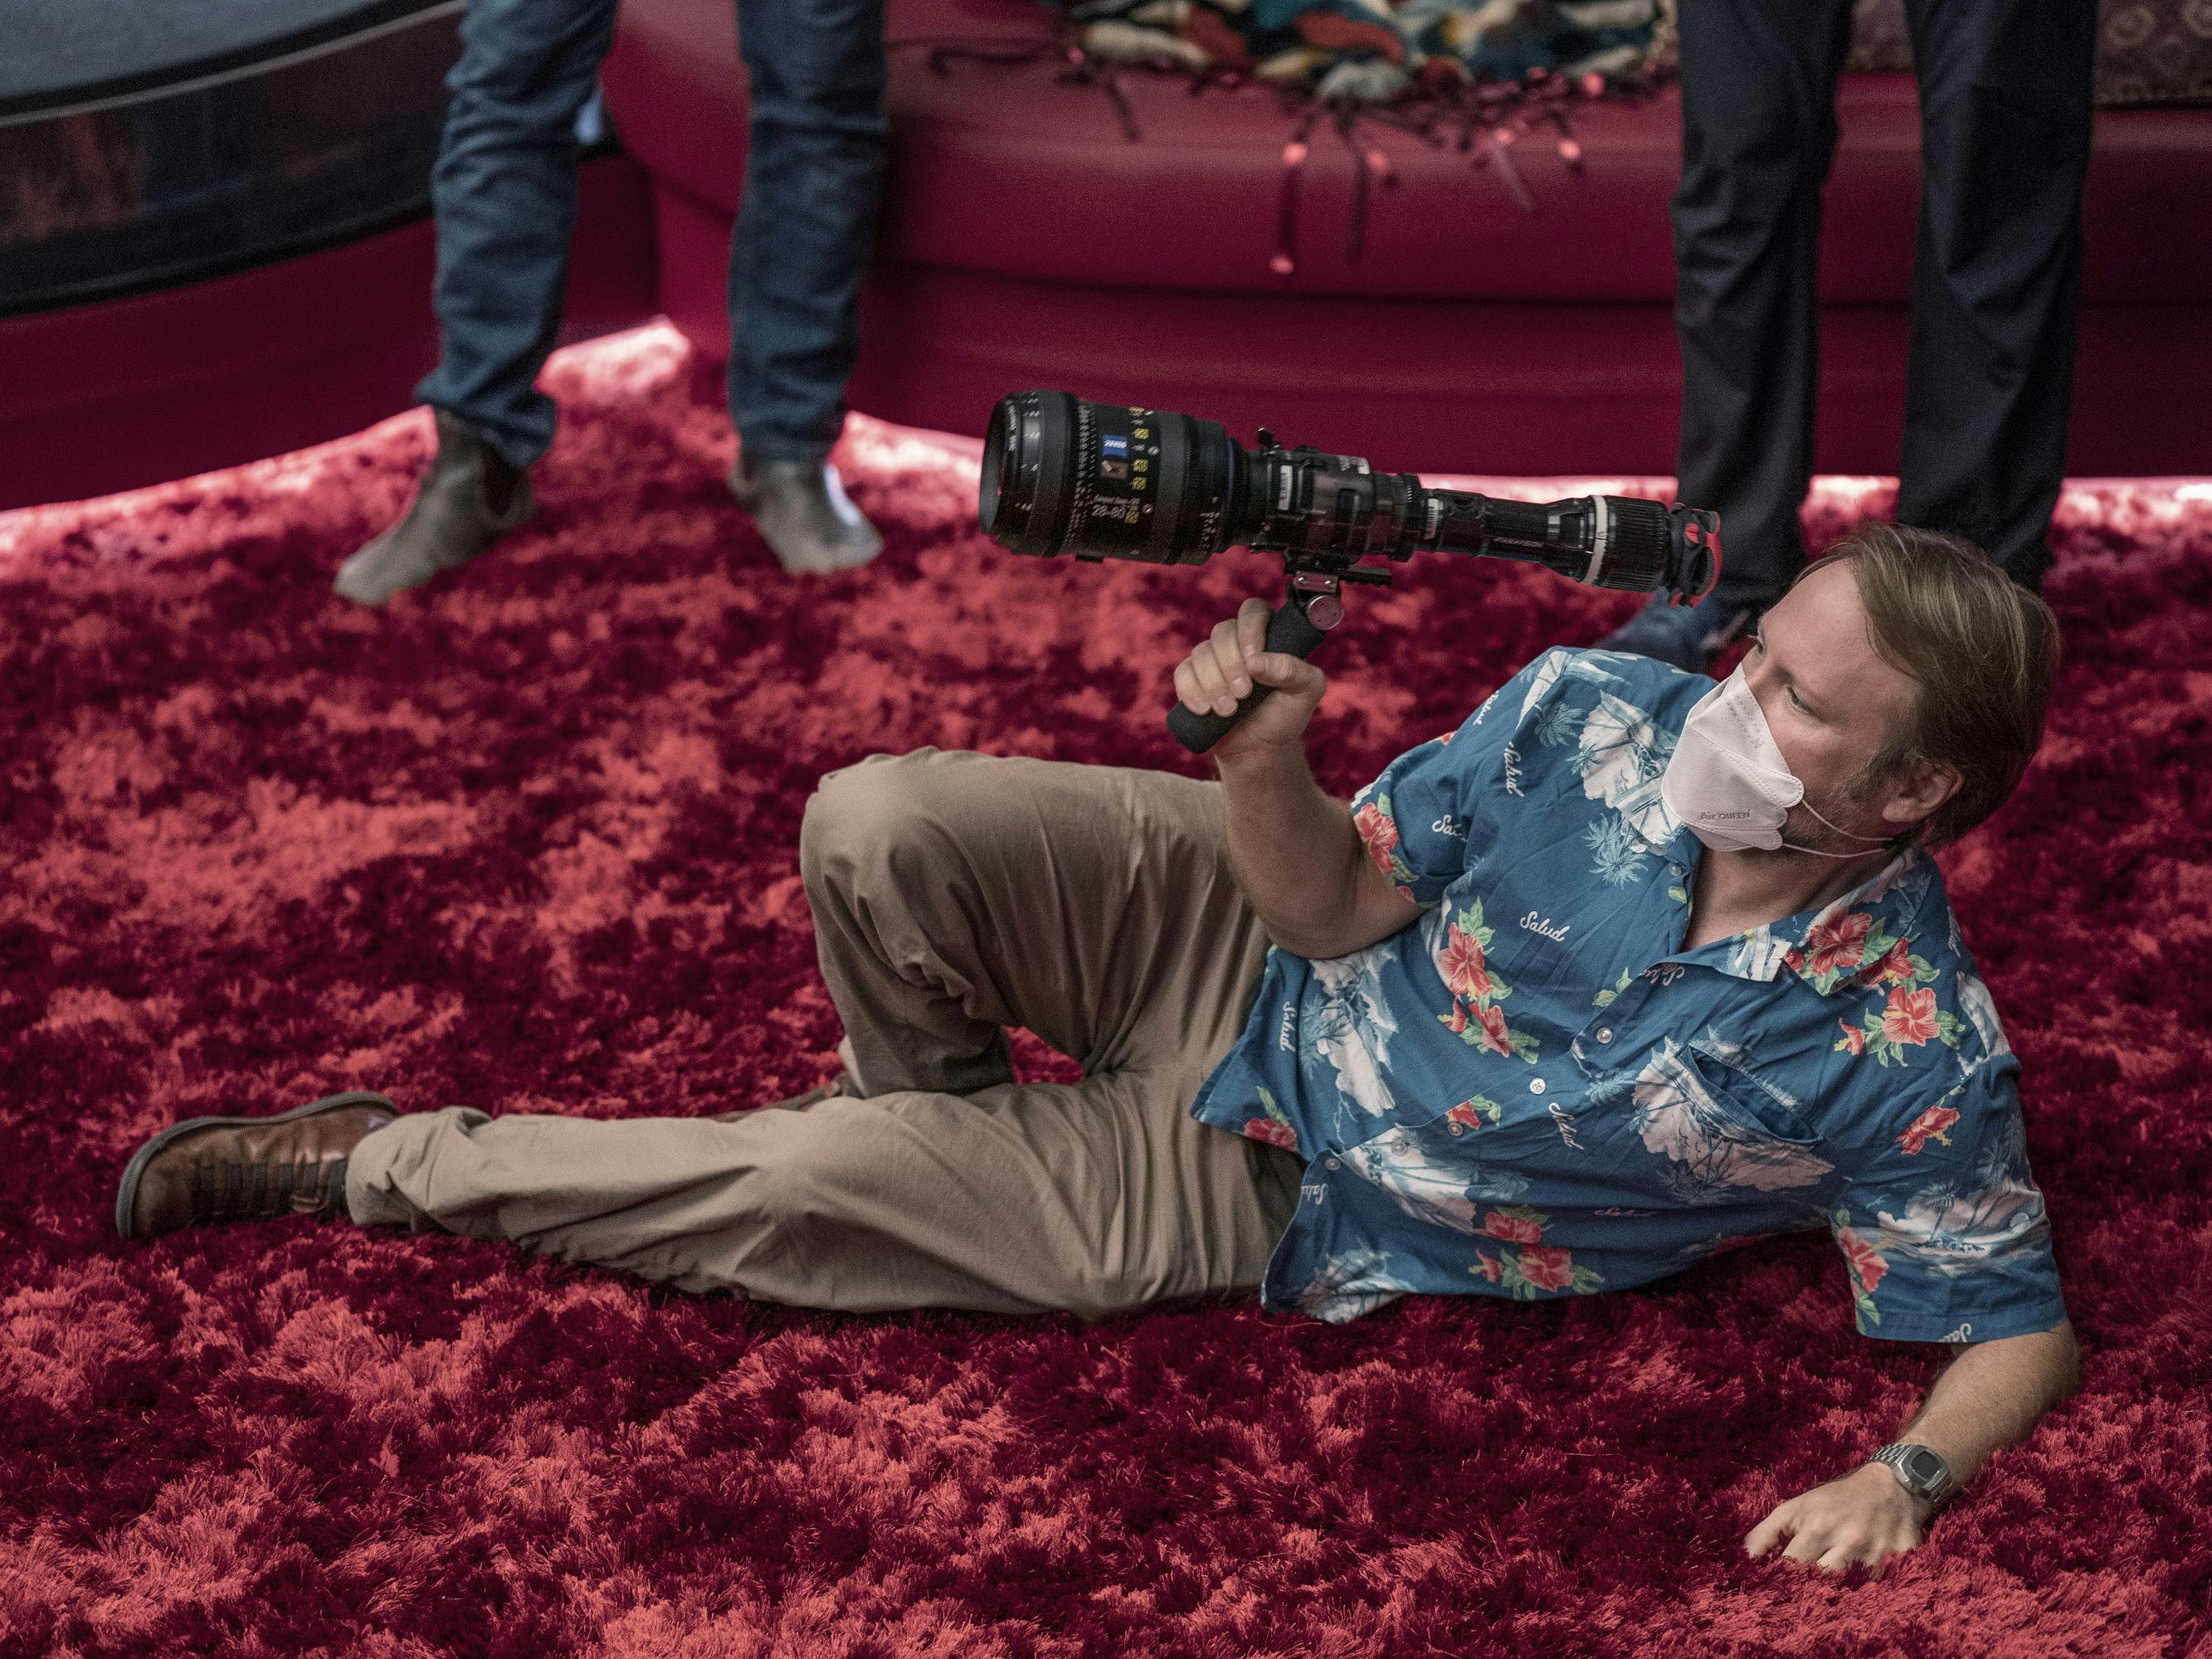 Rian Johnson wears a blue Hawaiian shirt and khakis and stretches out on a red velvet rug holding a camera.